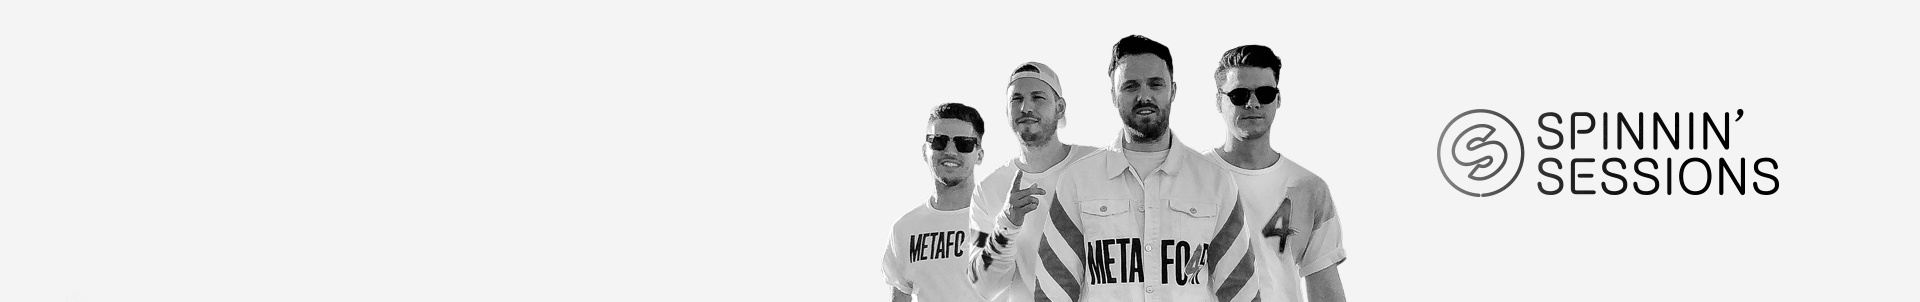 METAFO4R presents music video + exclusive Guest Mix